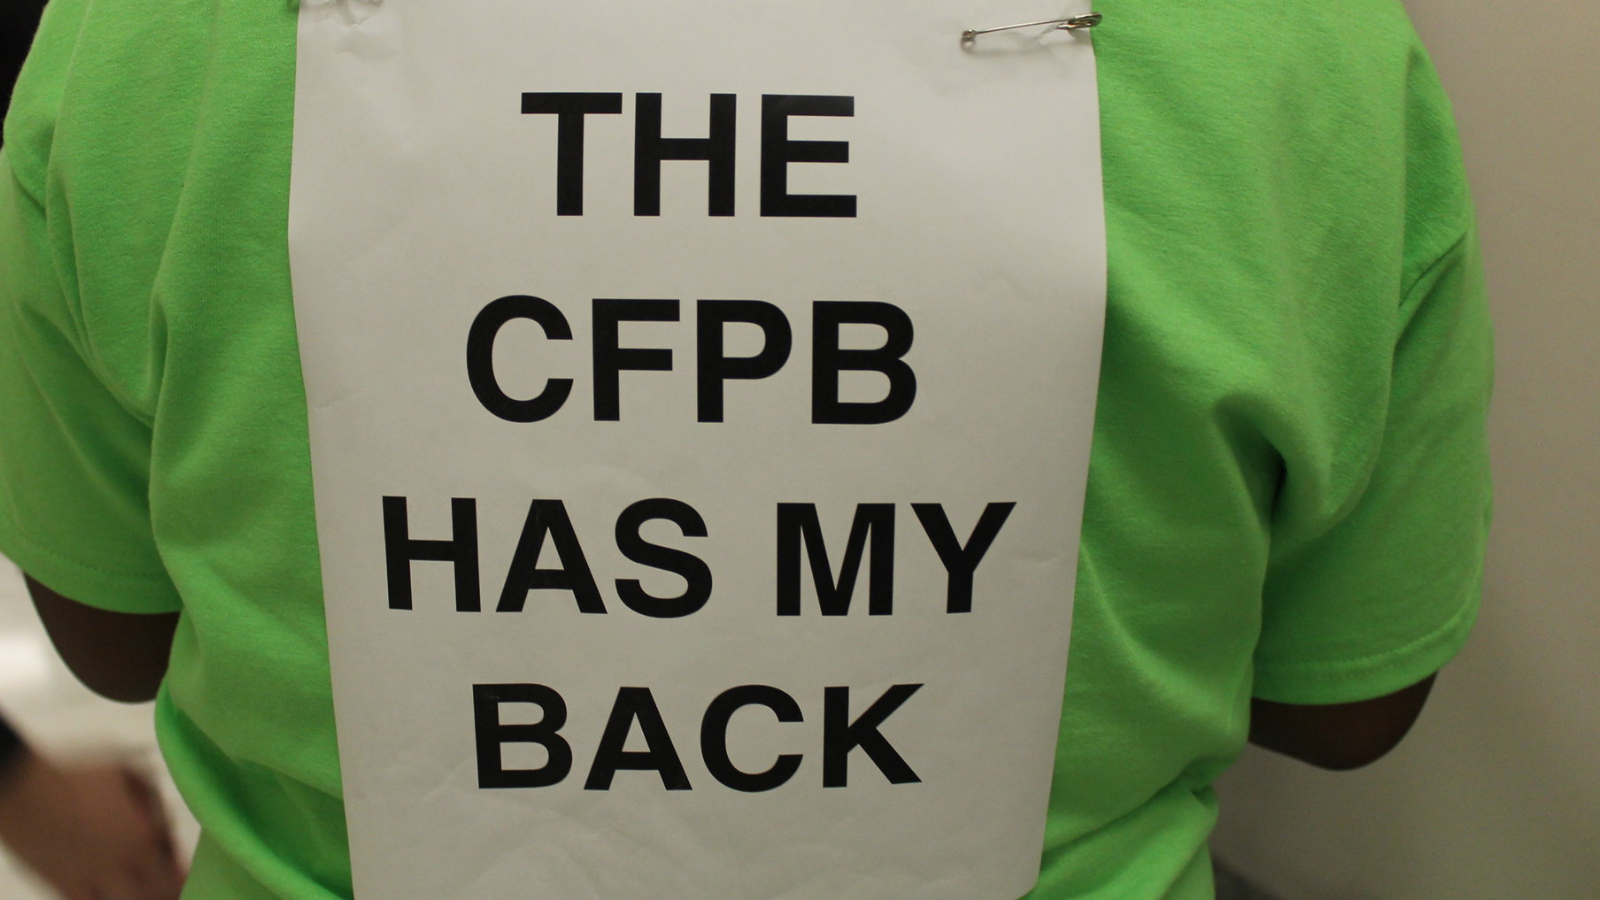 Pinned sign "CFPB Has My Back"